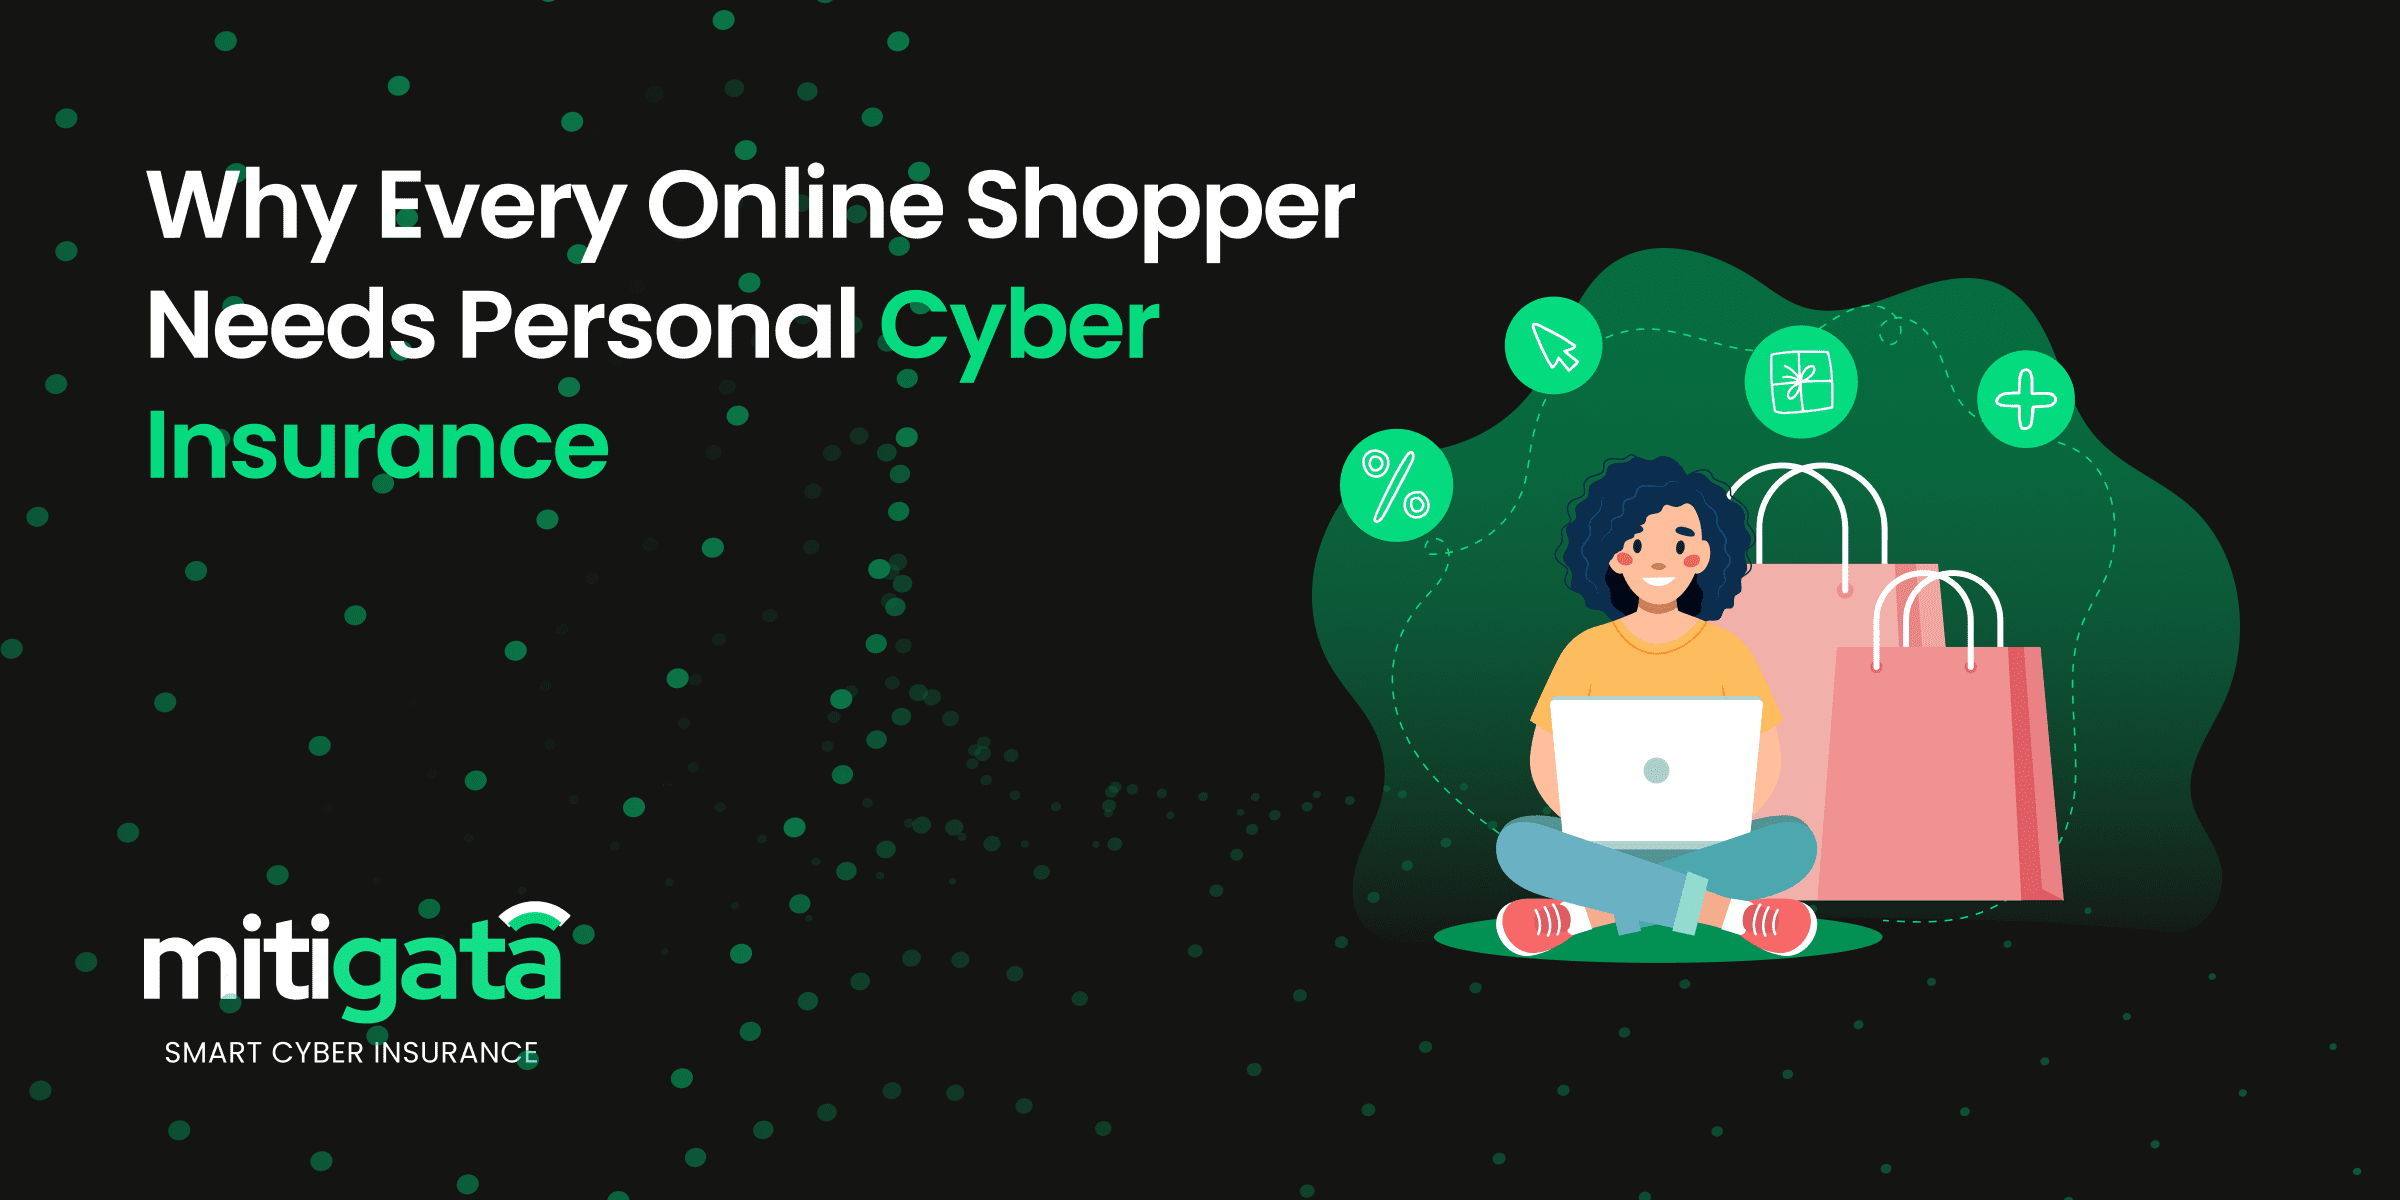 Why Every Online Shopper Needs Personal Cyber Insurance